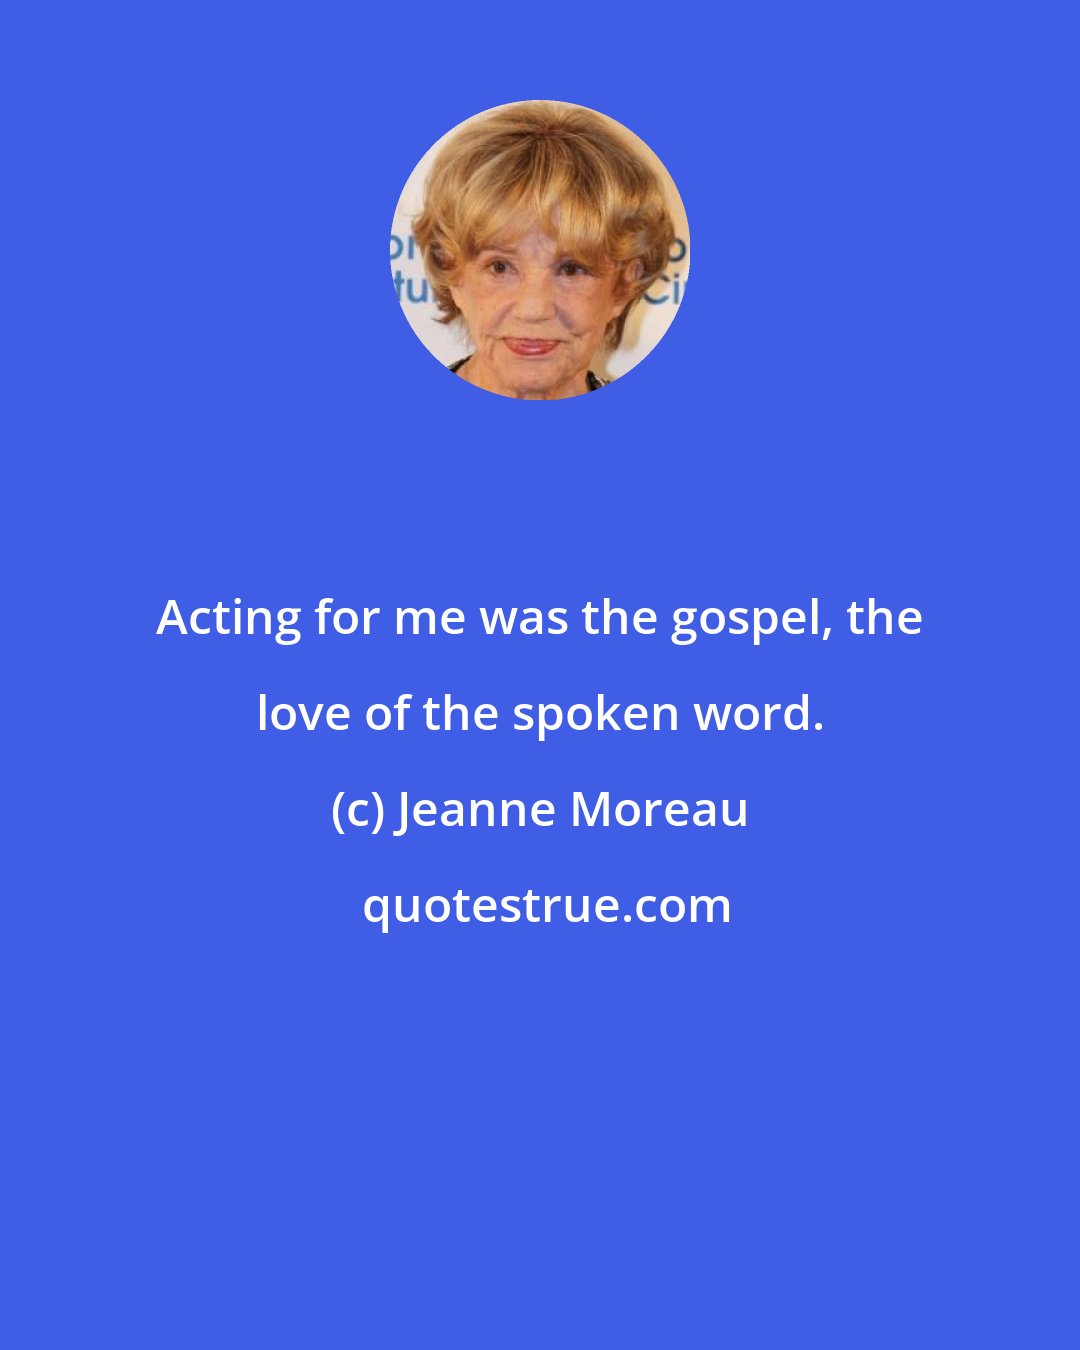 Jeanne Moreau: Acting for me was the gospel, the love of the spoken word.